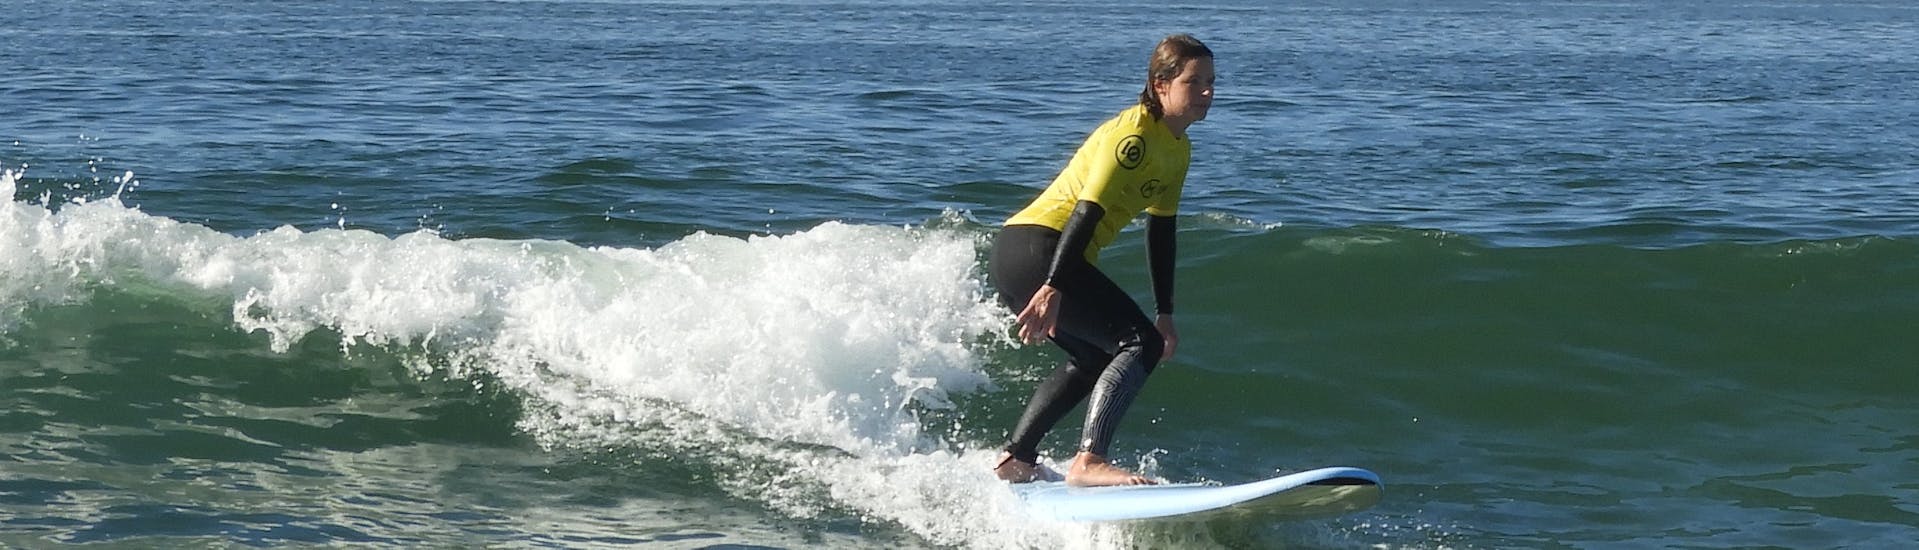 A young girl is learning how to surf during her Private Surf Lessons in Matosinhos with Linha De Onda Surfing School Matosinhos.